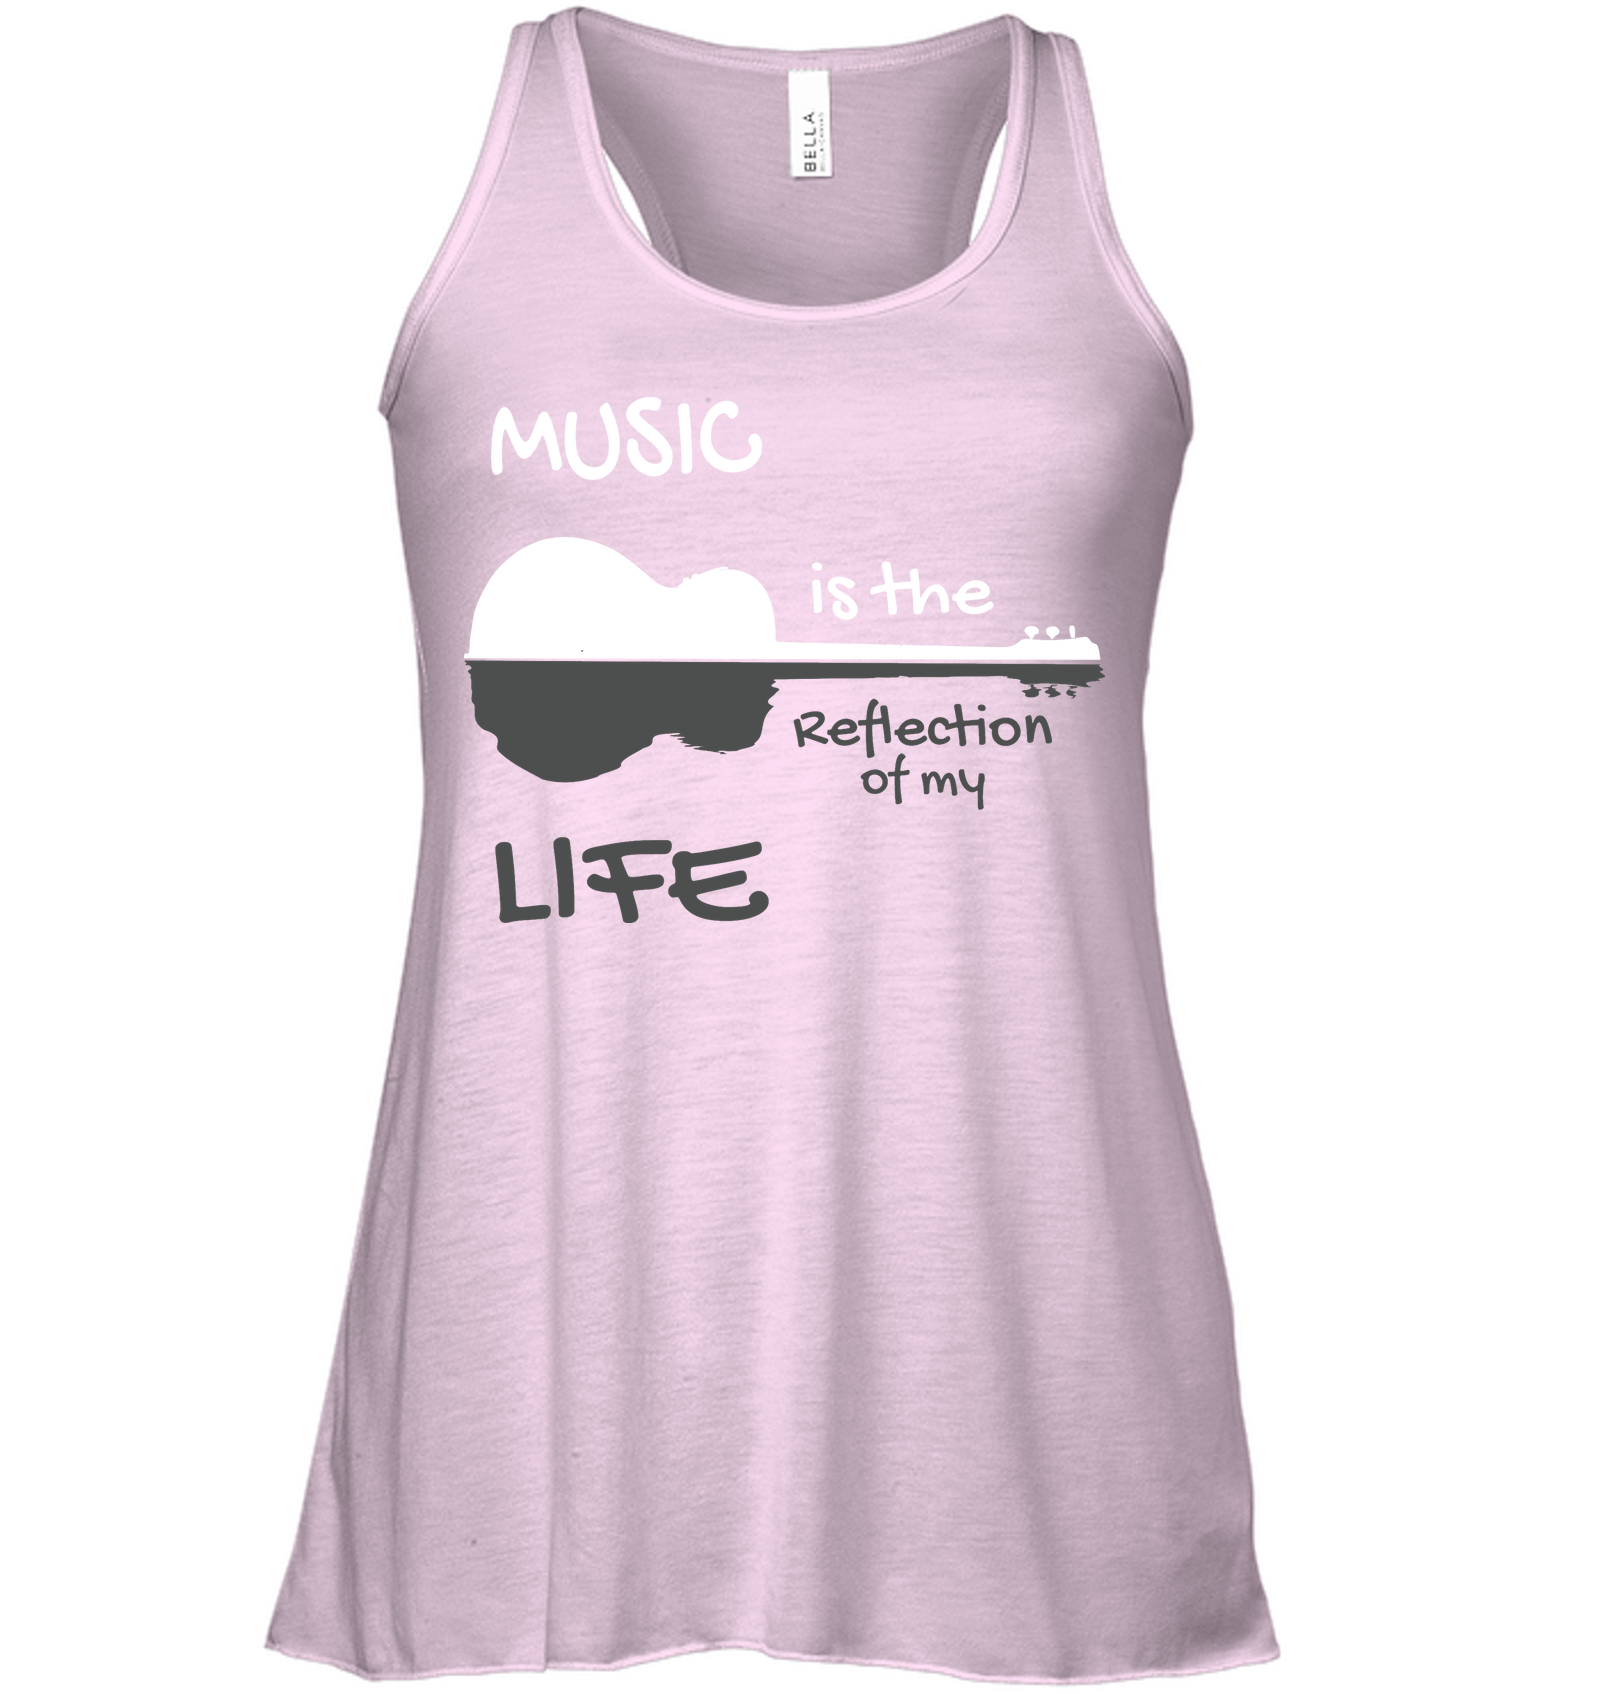 Music is the Reflection of my Life - Bella + Canvas Women's Flowy Racerback Tank